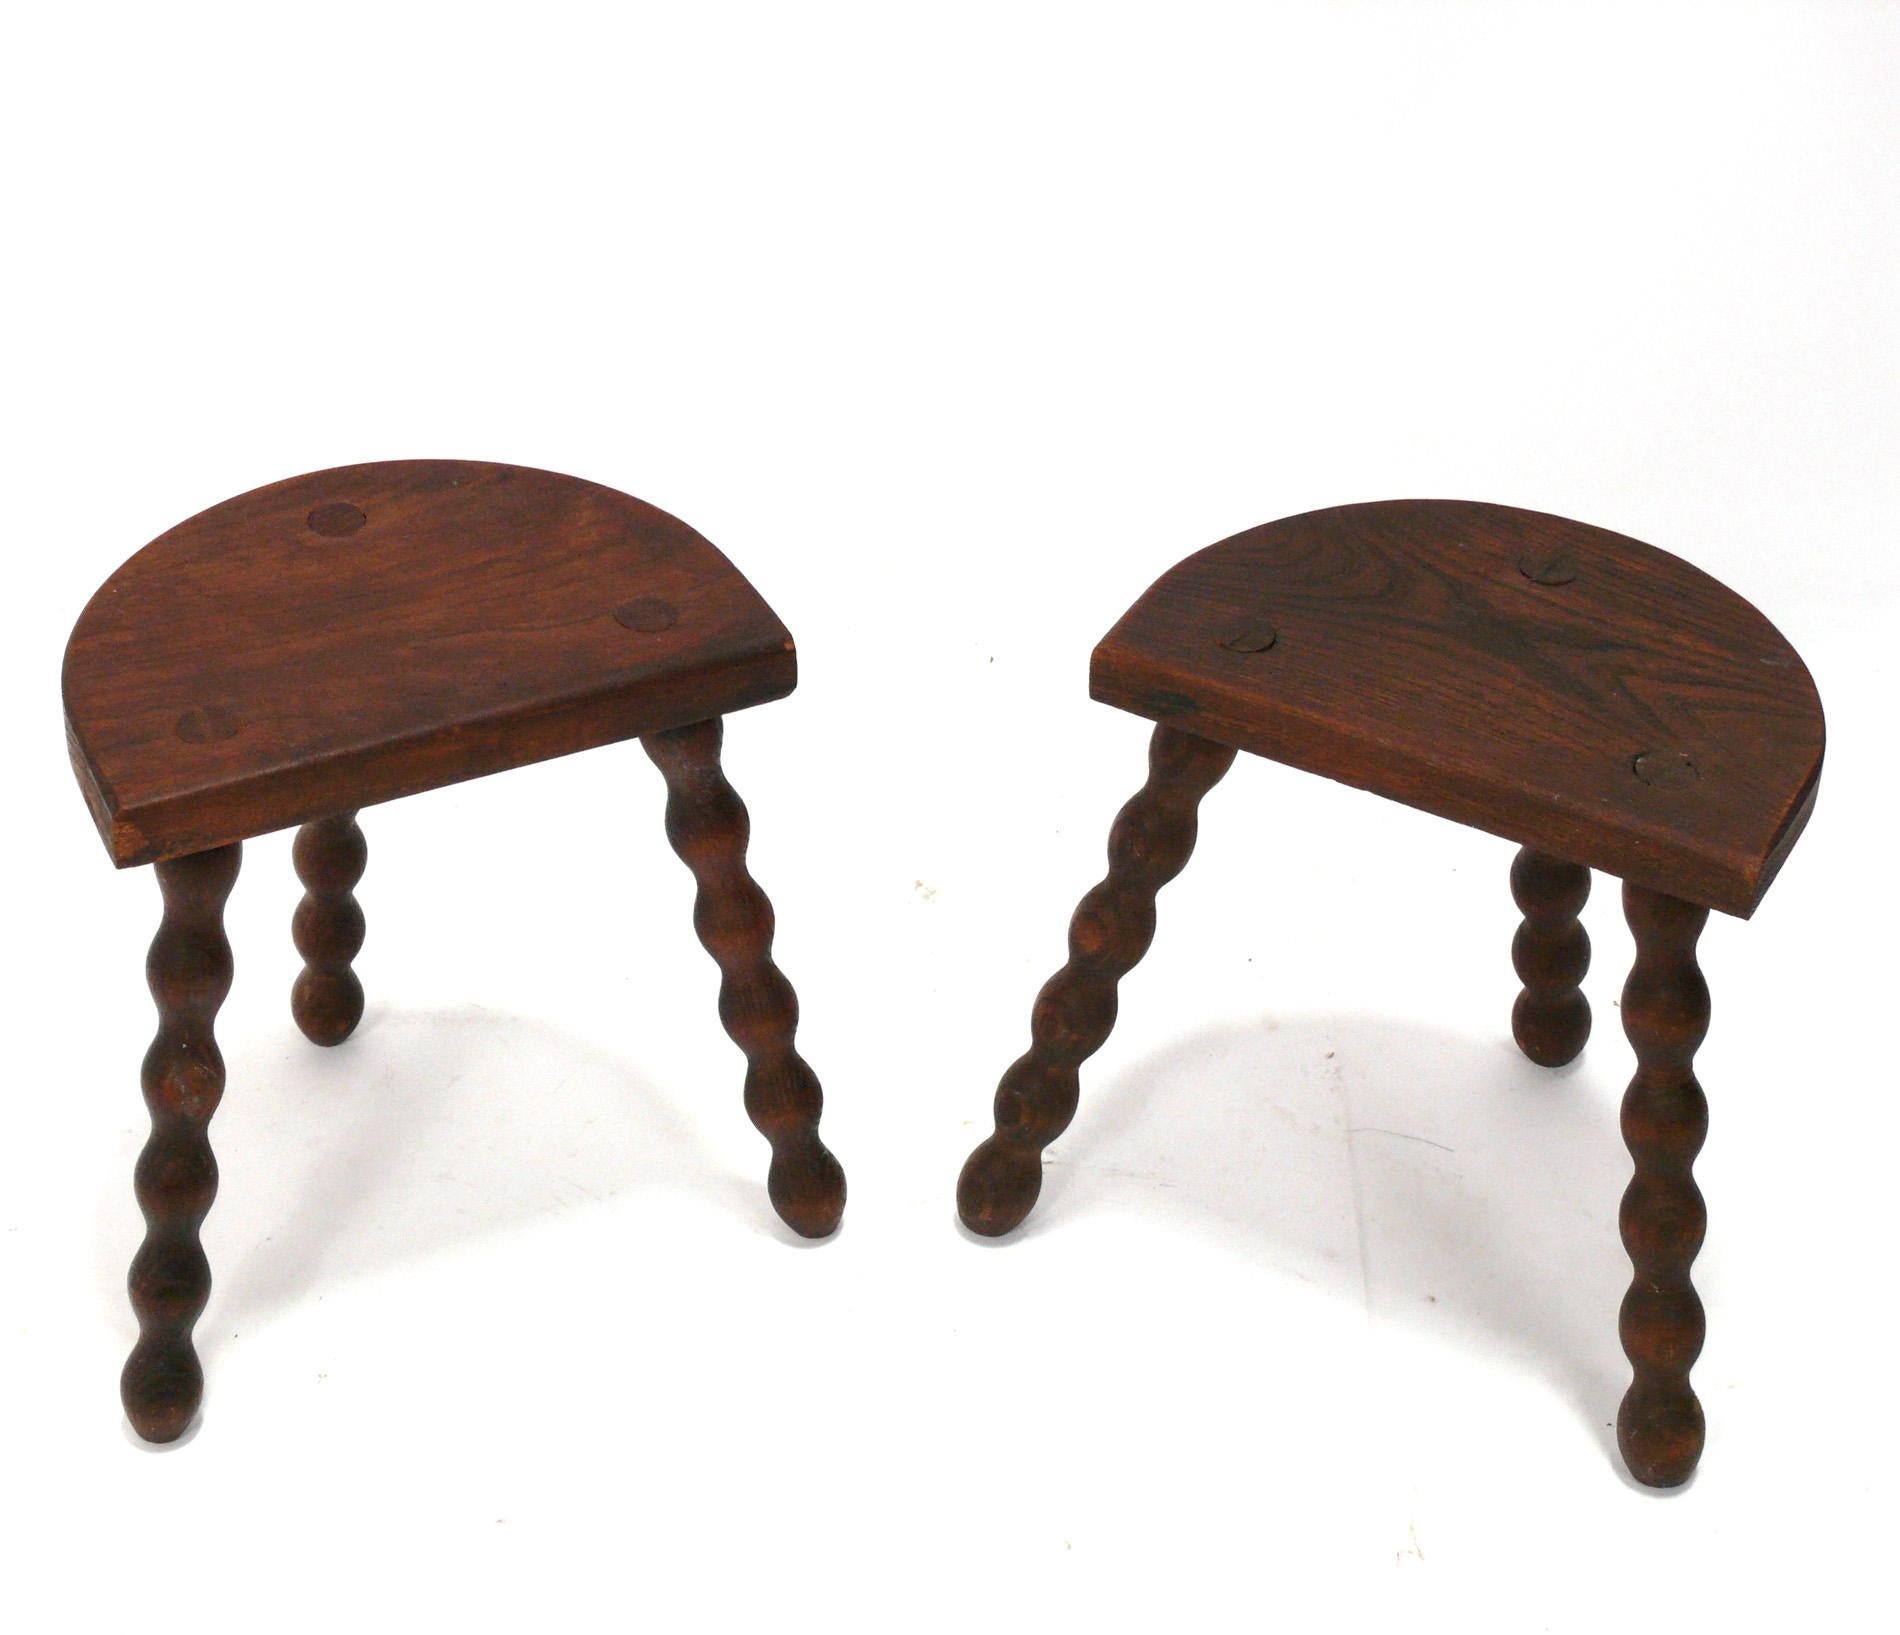 Selection of French Farmhouse stools, in the manner of Charlotte Perriand, France, circa 1950s. They retain their warm original patina. They are priced at $850 each or $1500 for the pair.